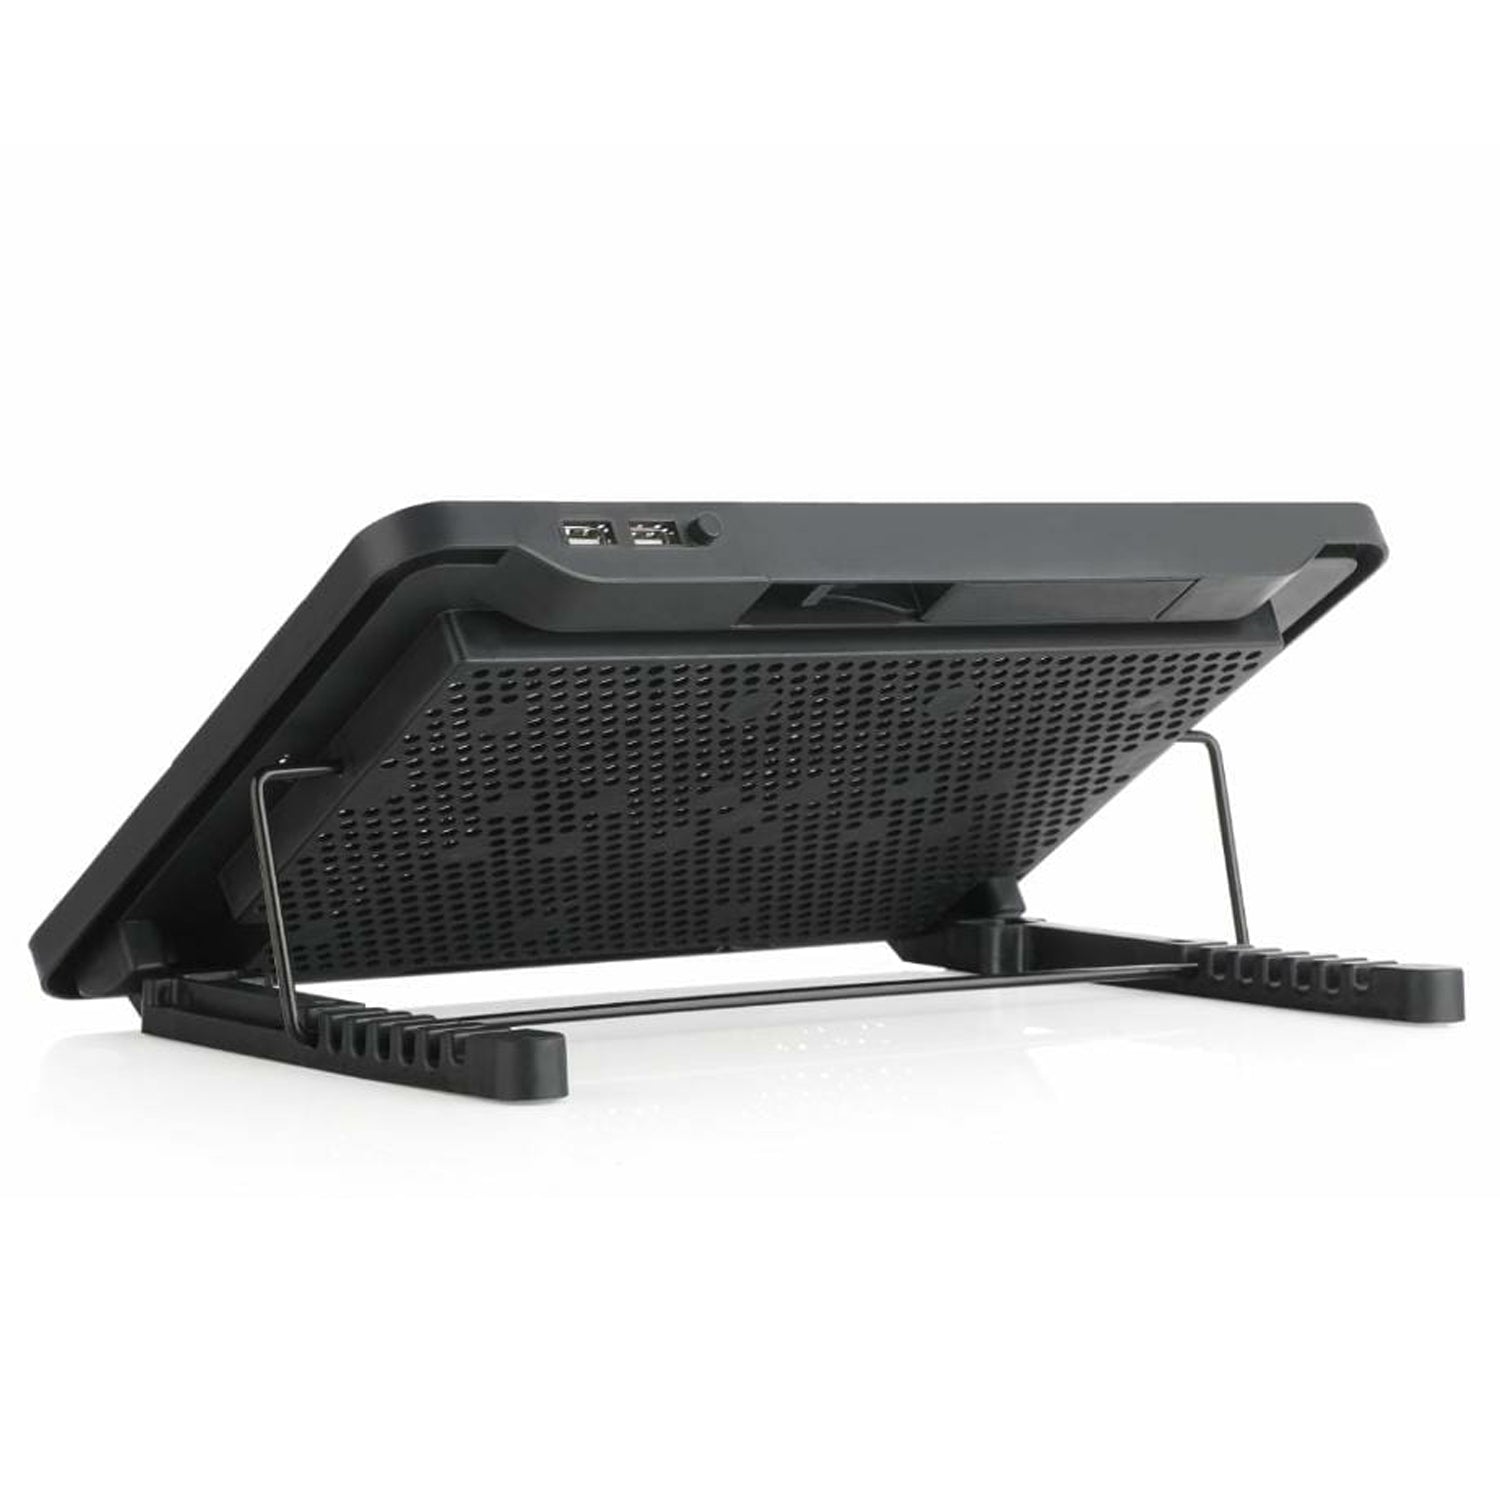 LAPTOP STAND WITH COOLING PAD